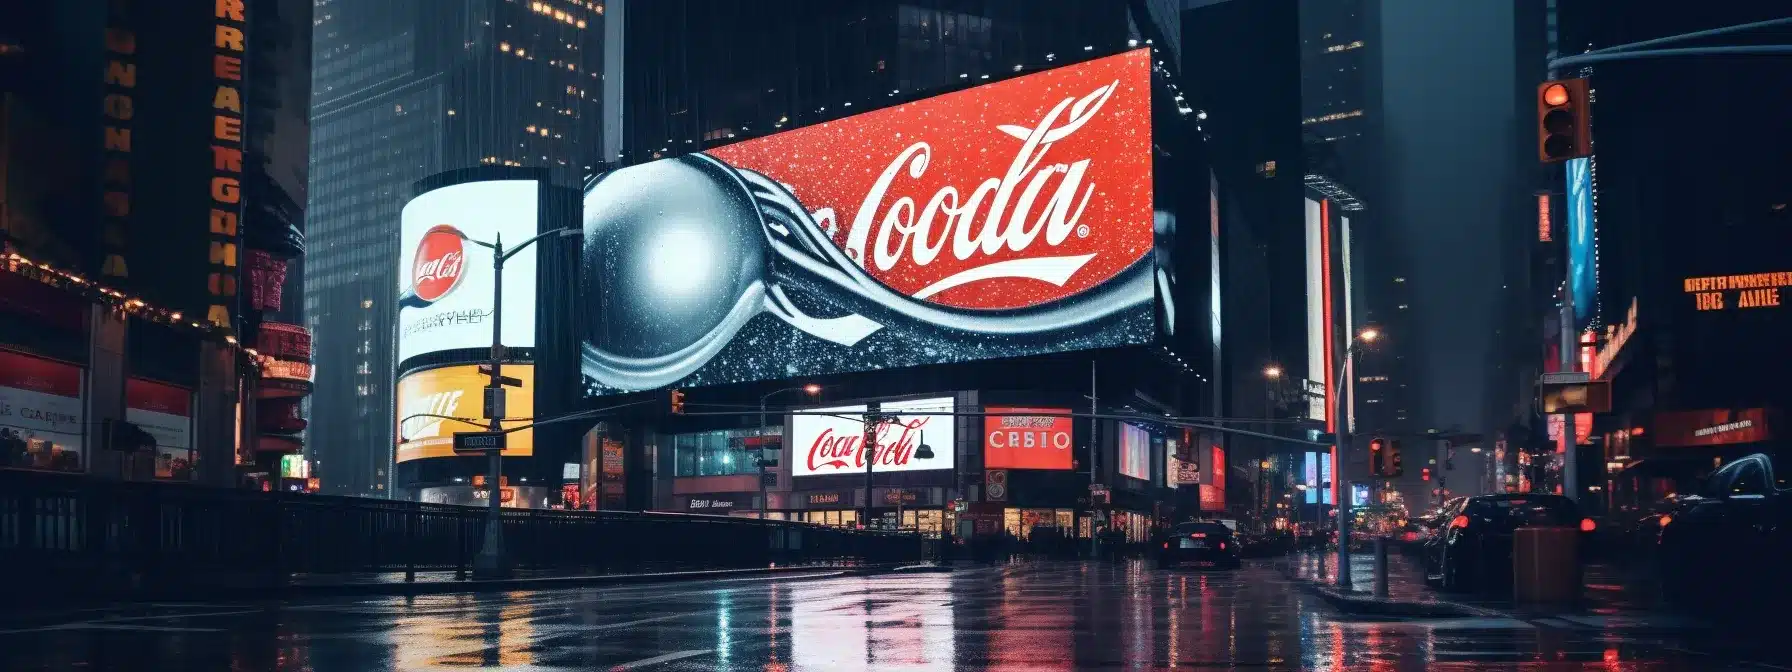 Nike Logo Displayed Prominently On Various Billboards In Bustling City Streets Around The World.